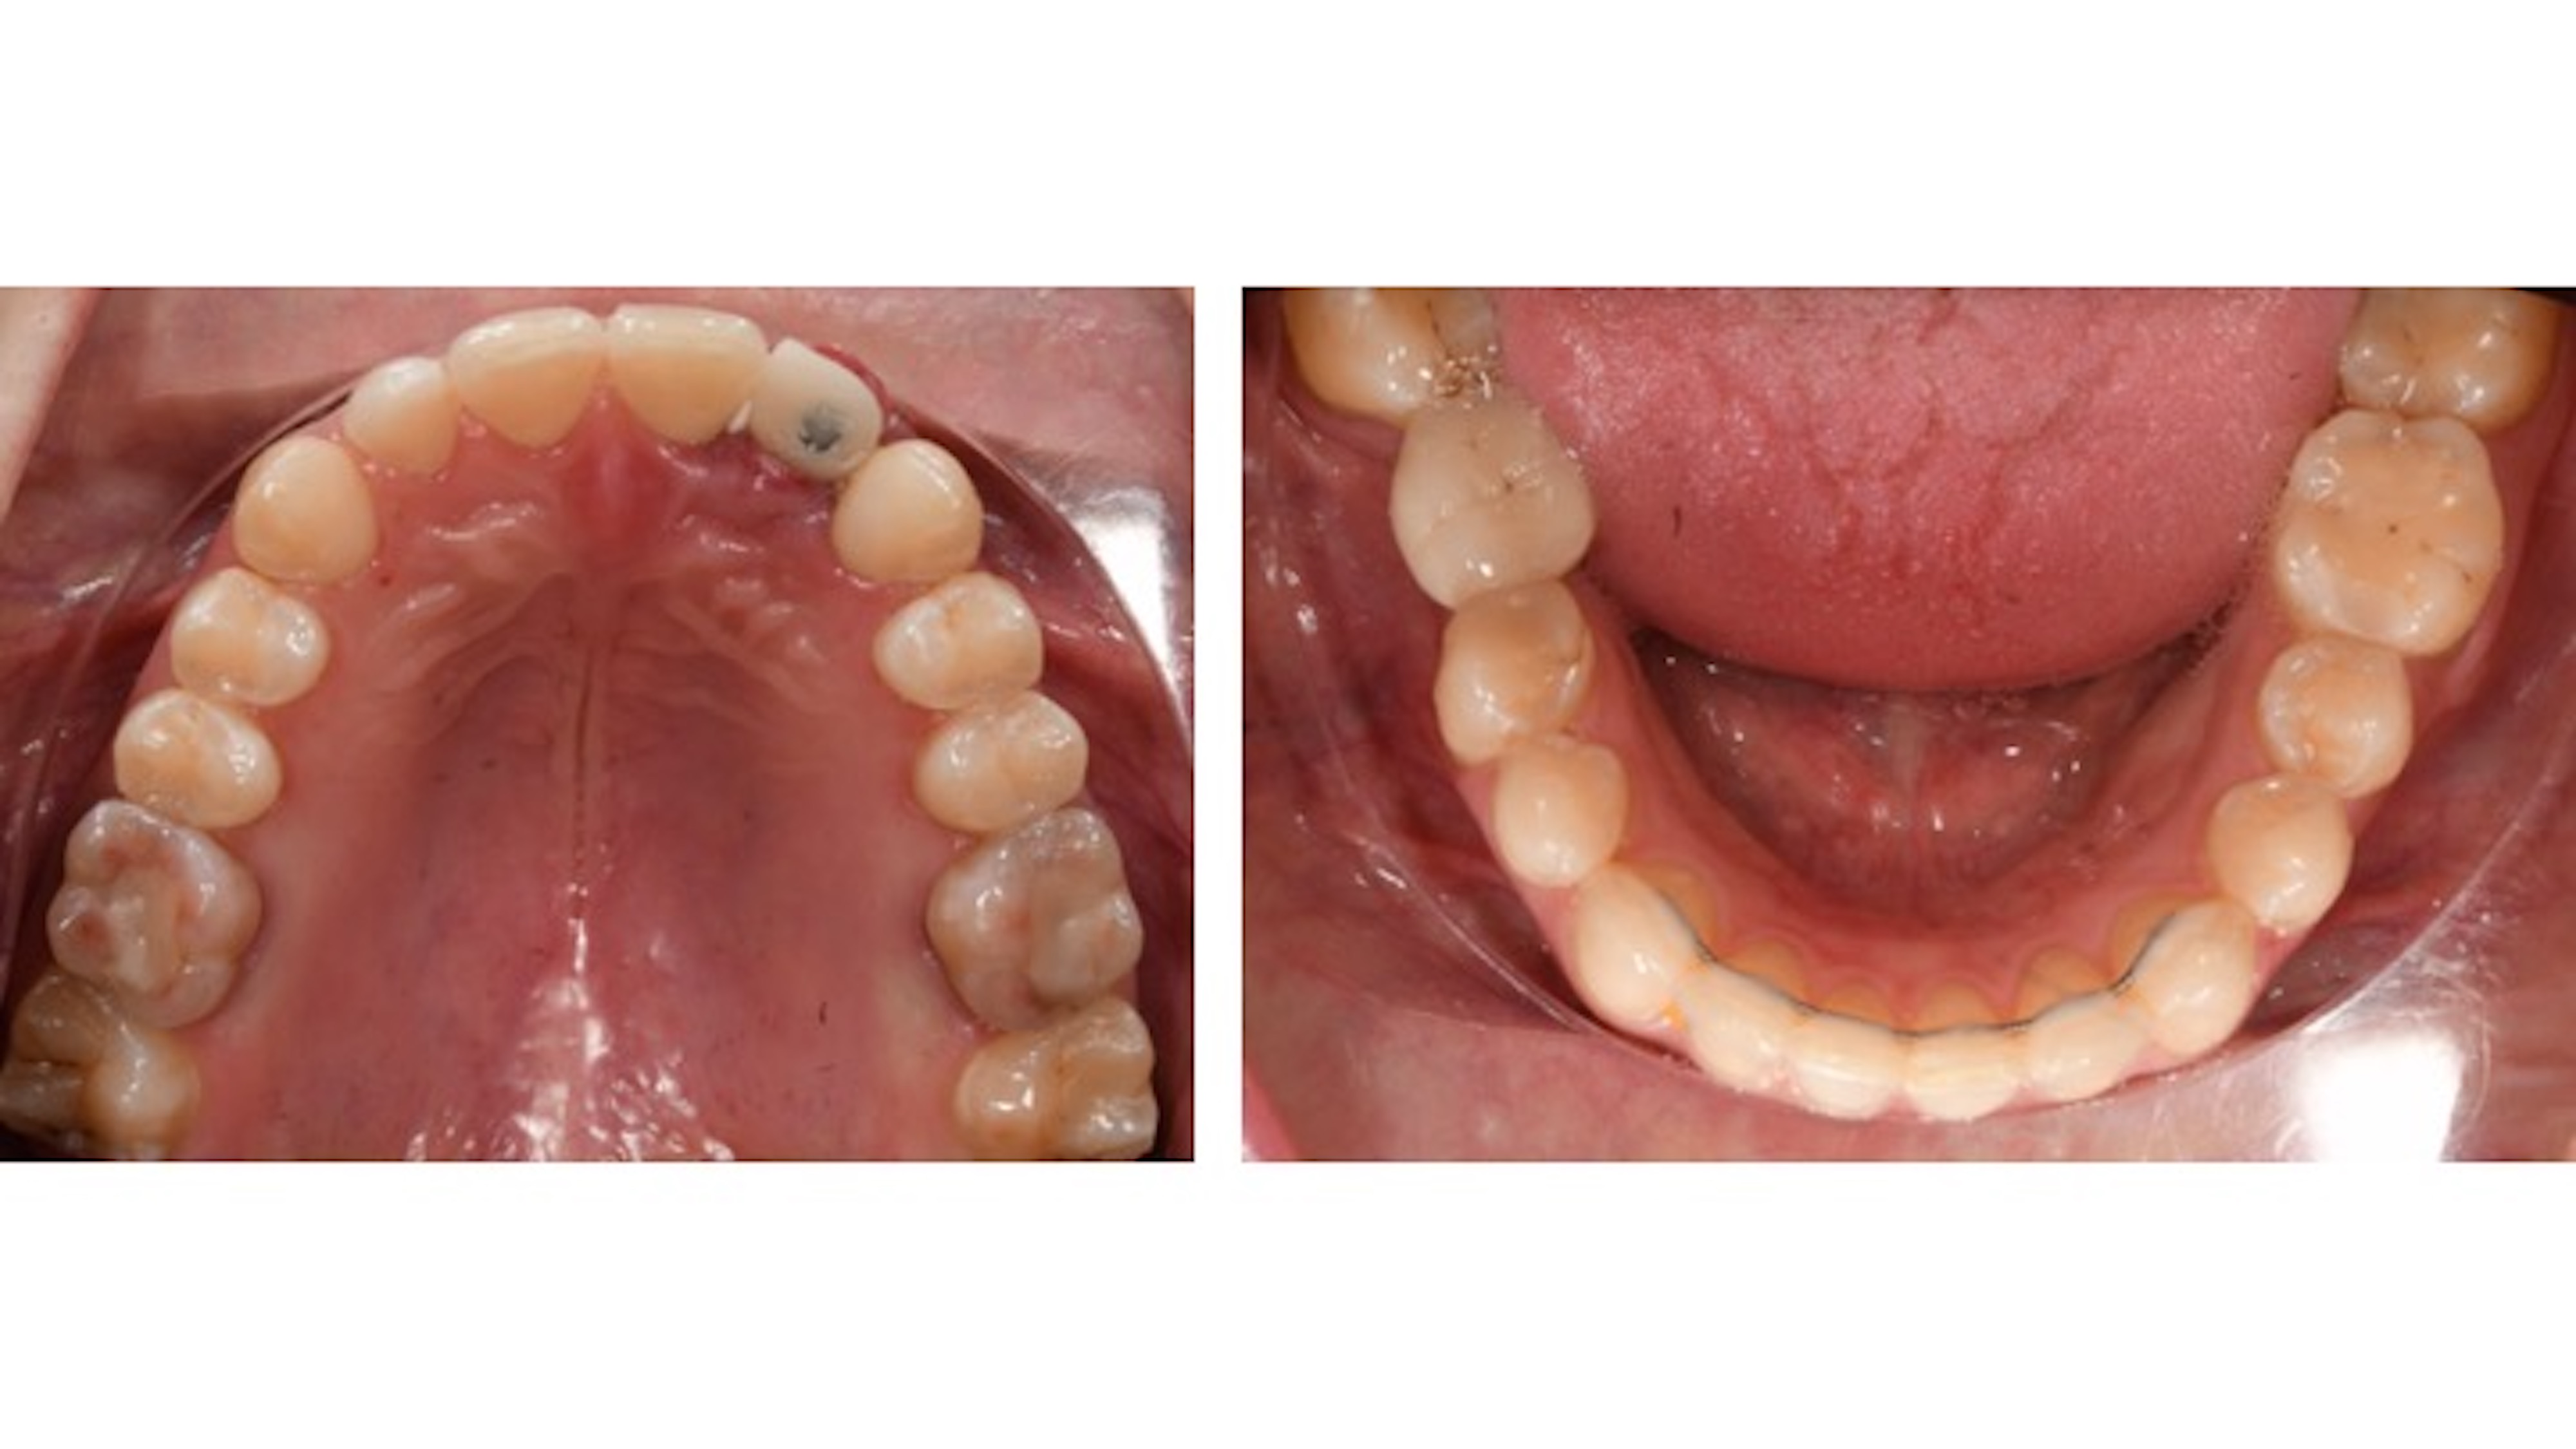 Figs. 11a & b: Occlusal photographs after orthodontic treatment.